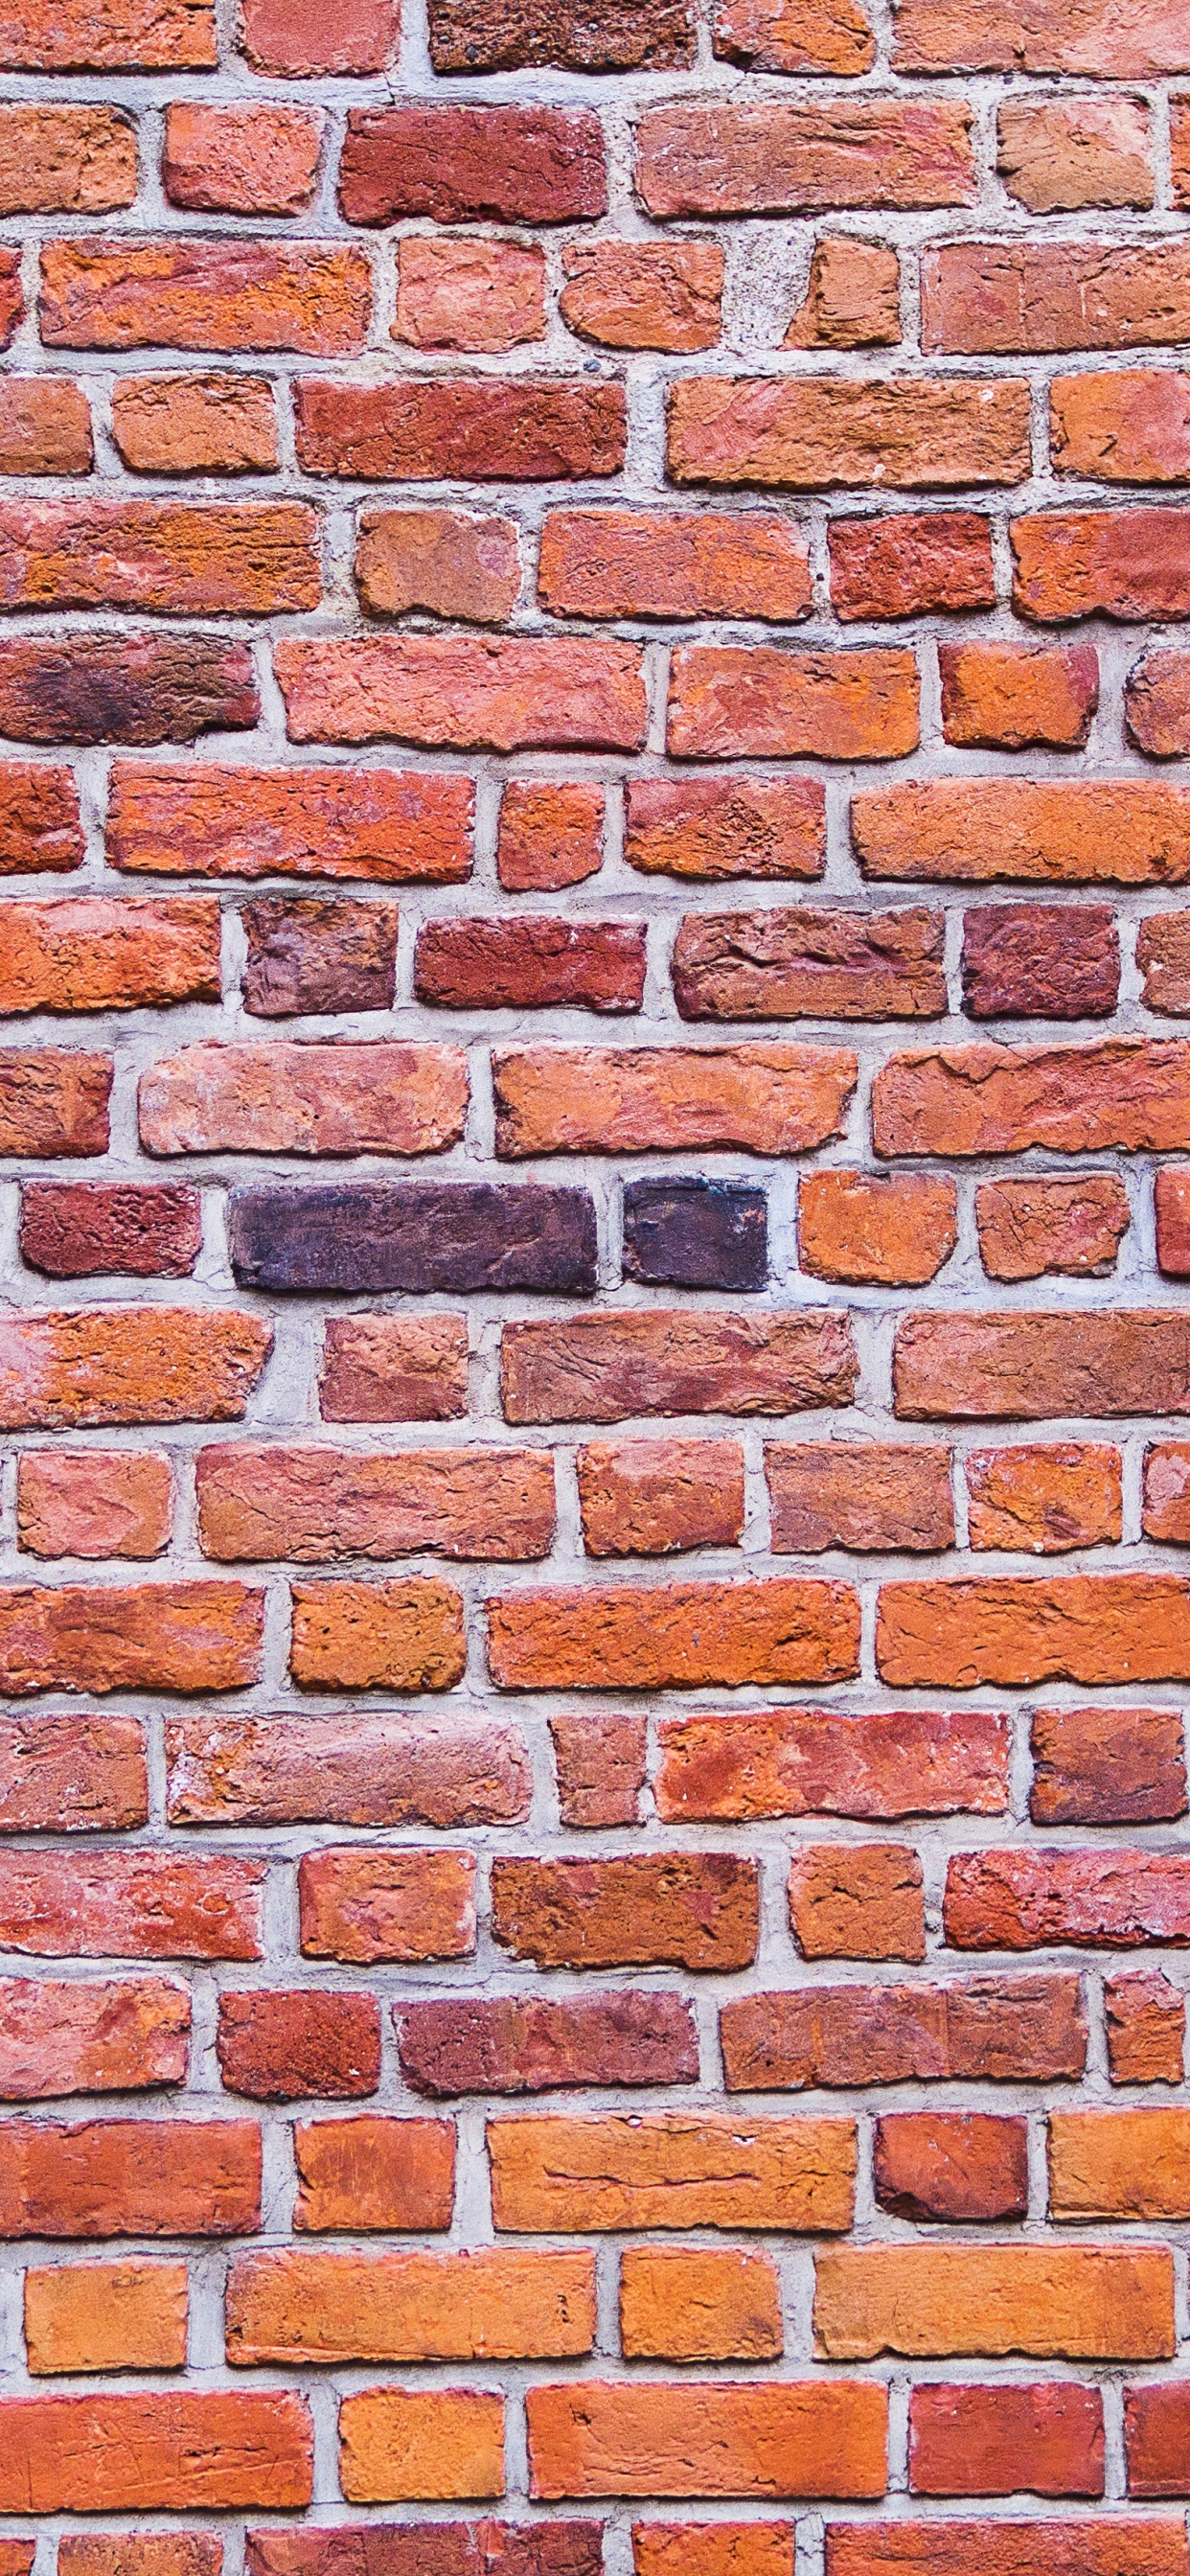 Brown and Black Brick Wall. Wallpaper in 1242x2688 Resolution